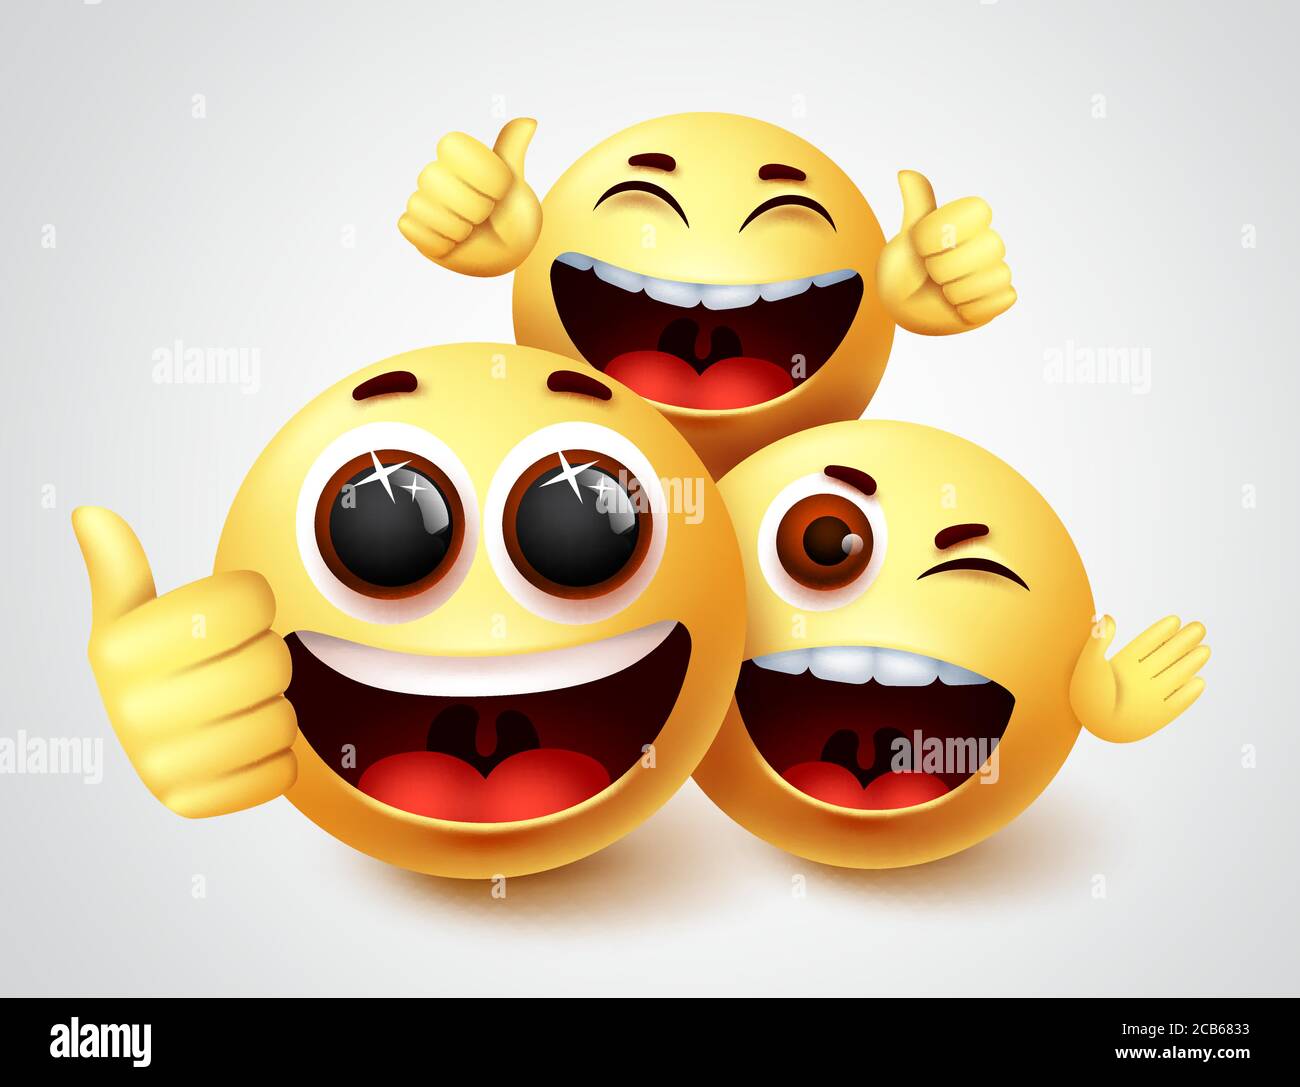 Smiley emoji friends character vector design. Emojis smiley of friendship emoticon in happy smiling and funny facial expression in white background. Stock Vector